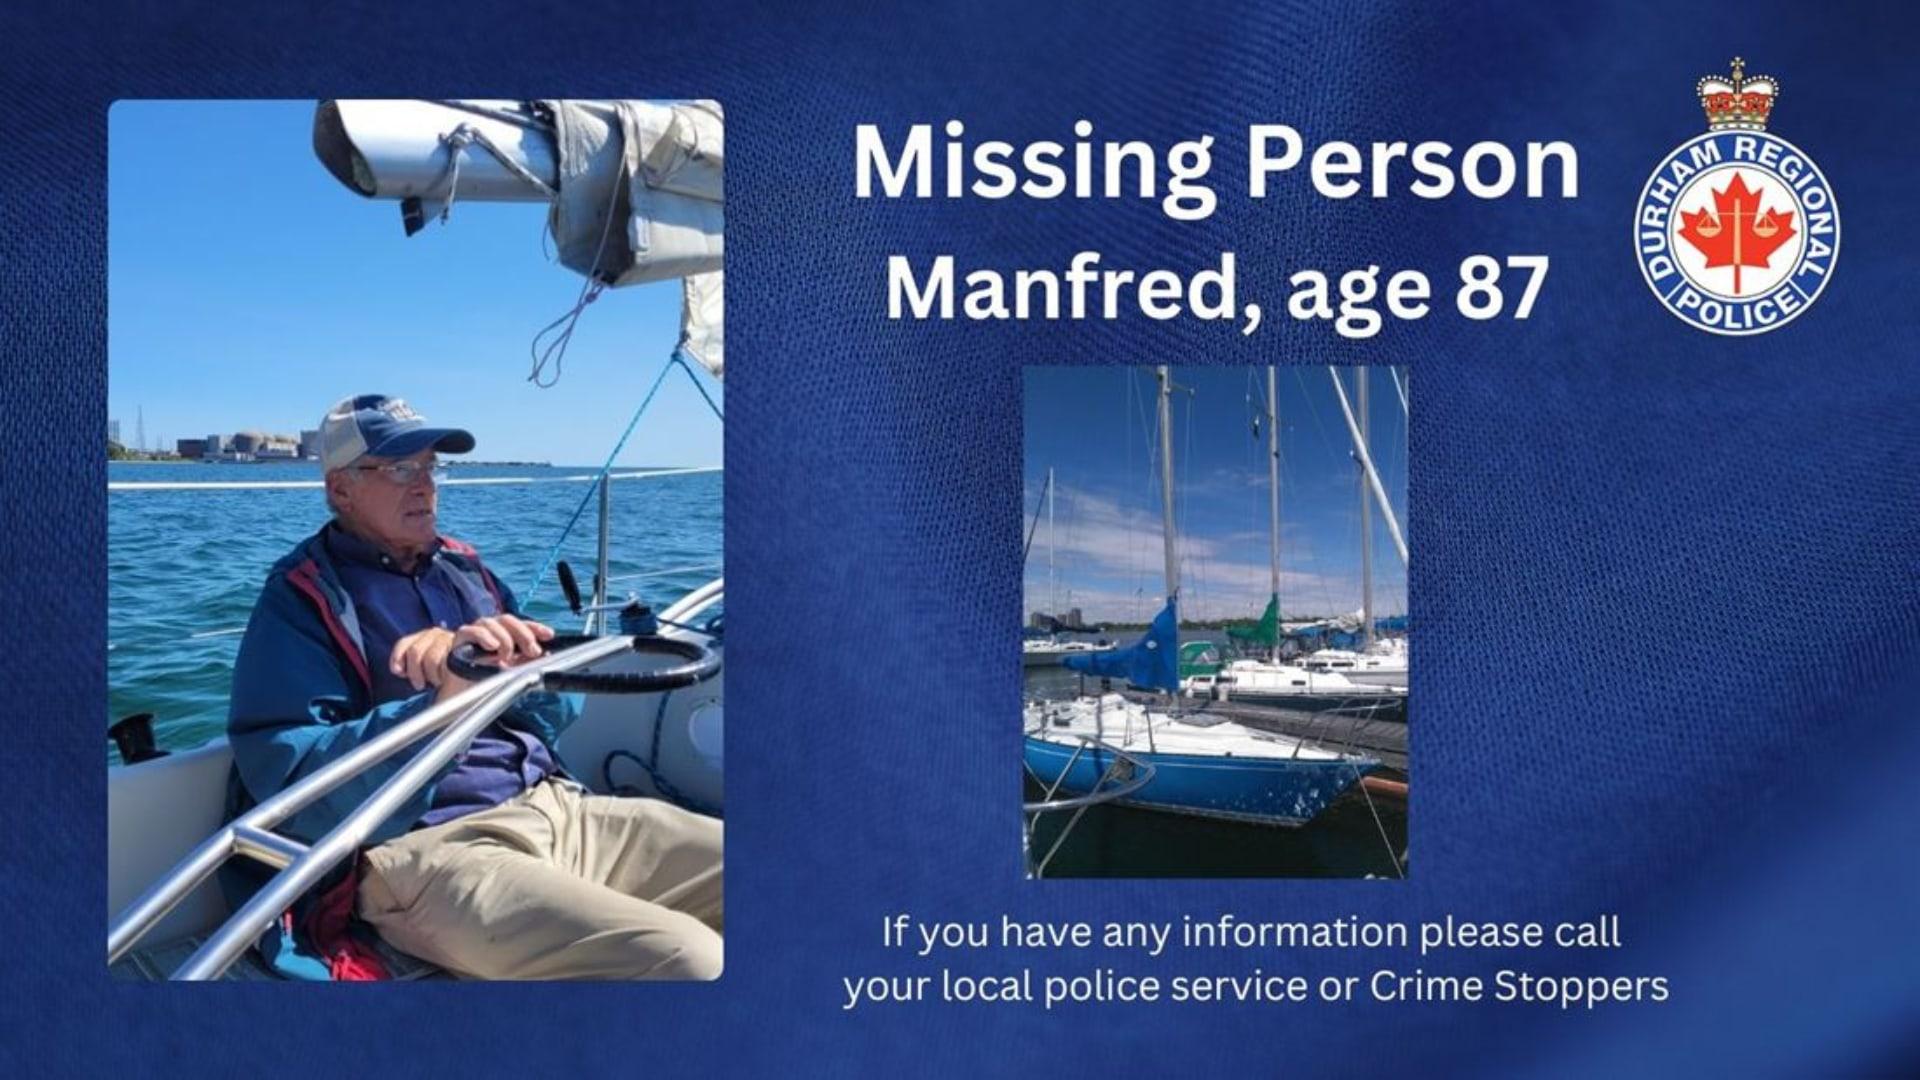 Durham Police Searching for Missing 87-Year-Old Male Boater